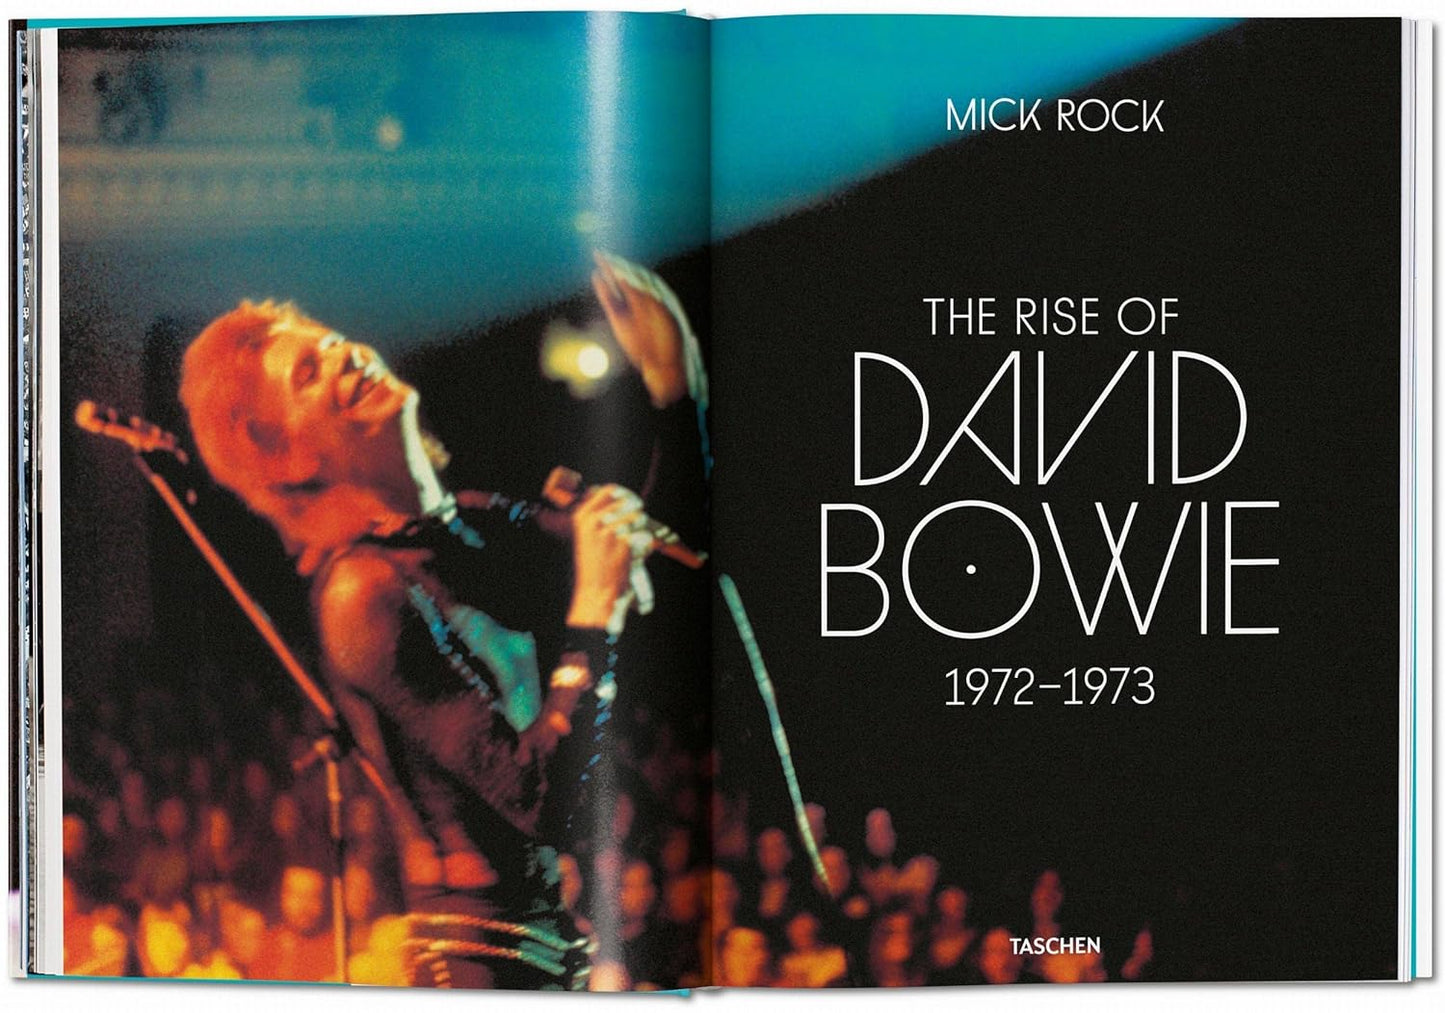 Mick Rock : The Rise of David Bowie, 1972-1973